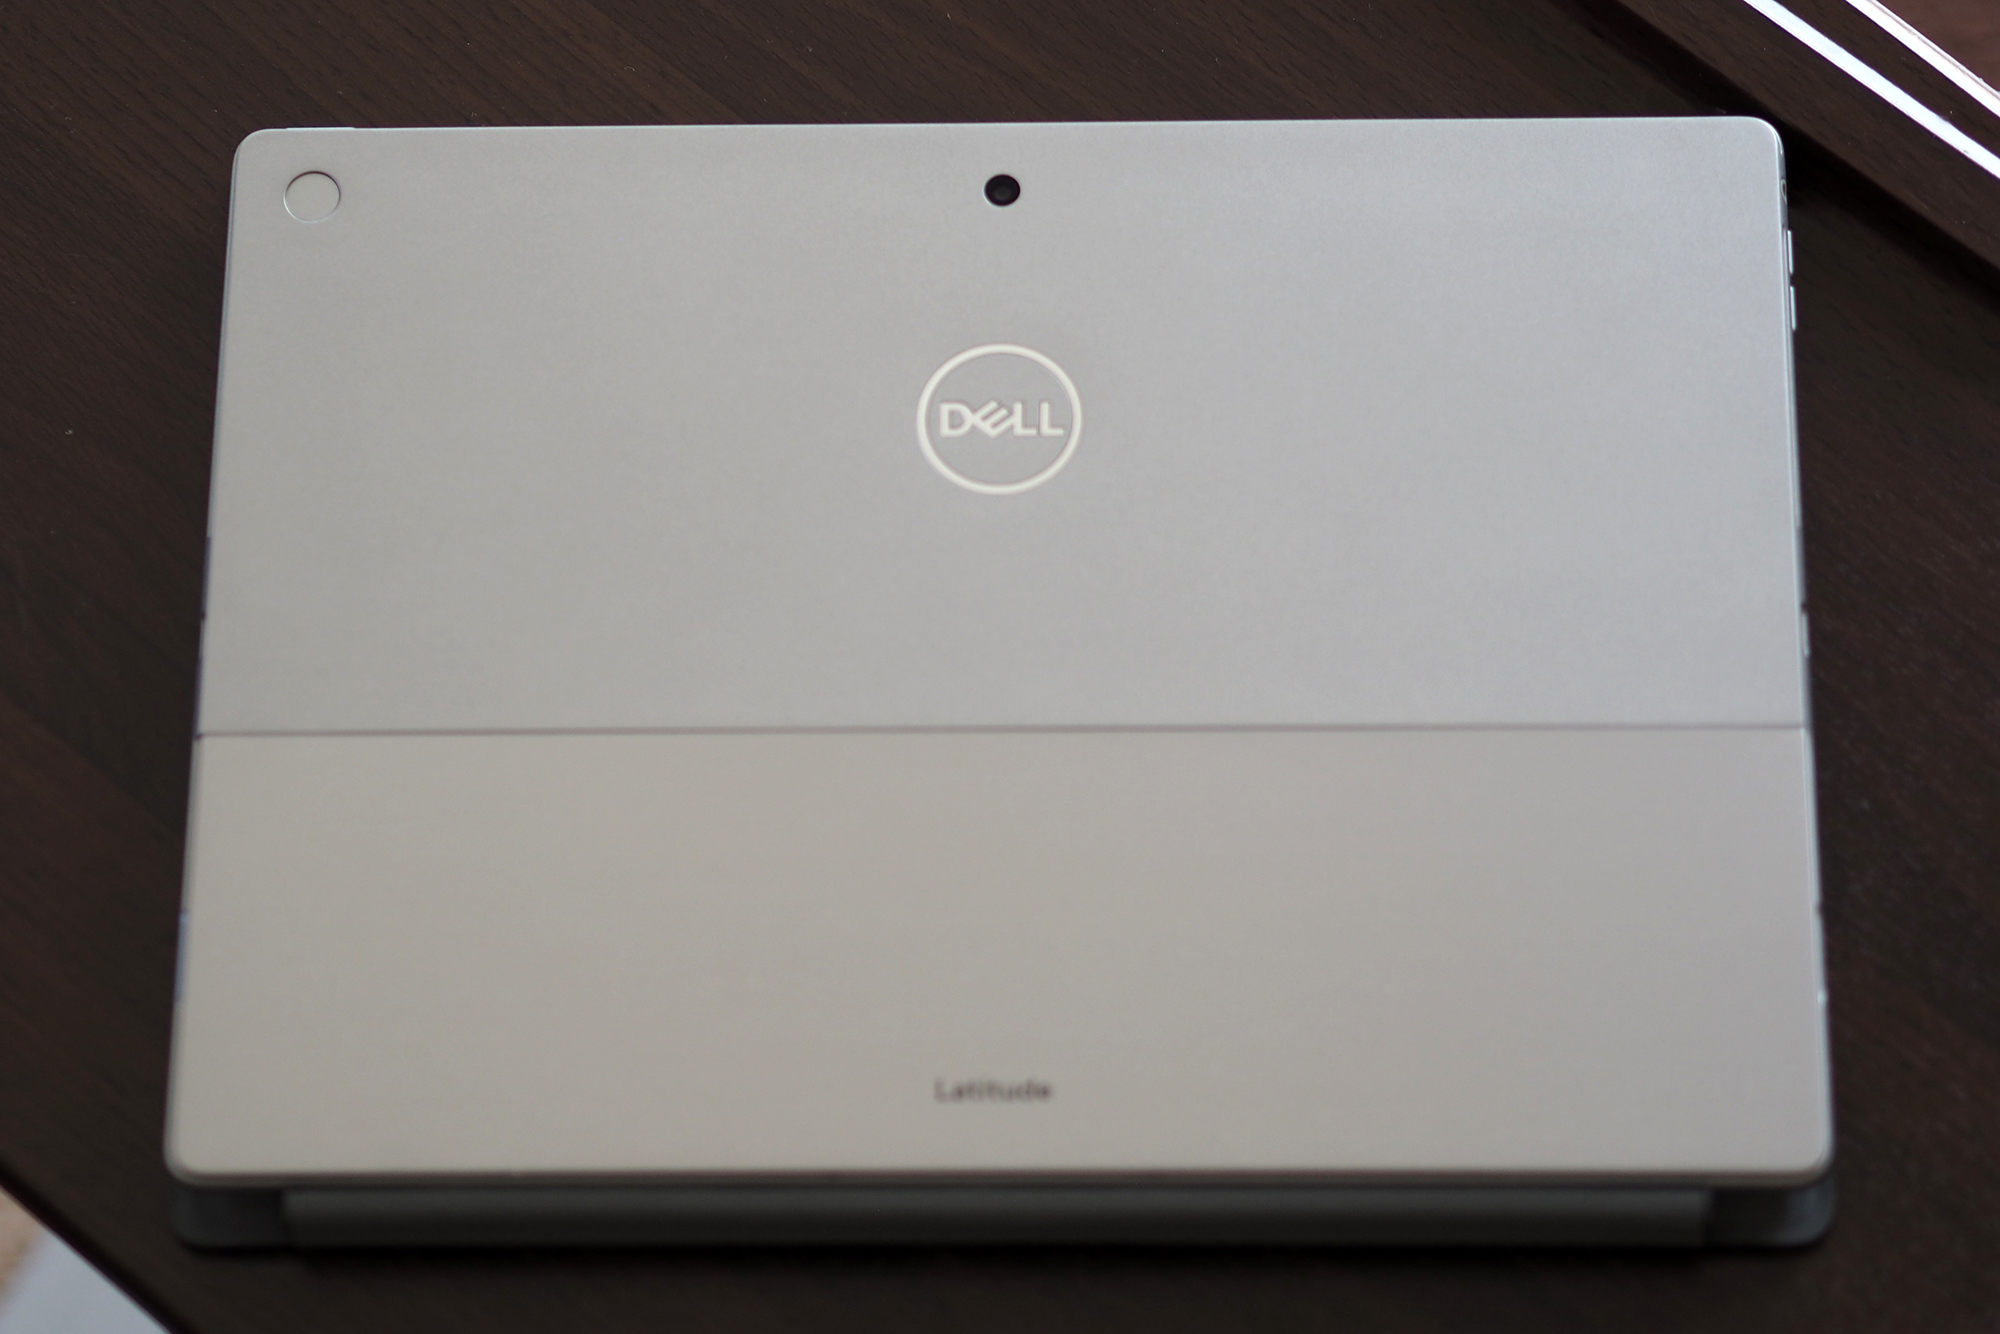 Dell Latitude 7320 Detachable Laptop review: a remote working superstar